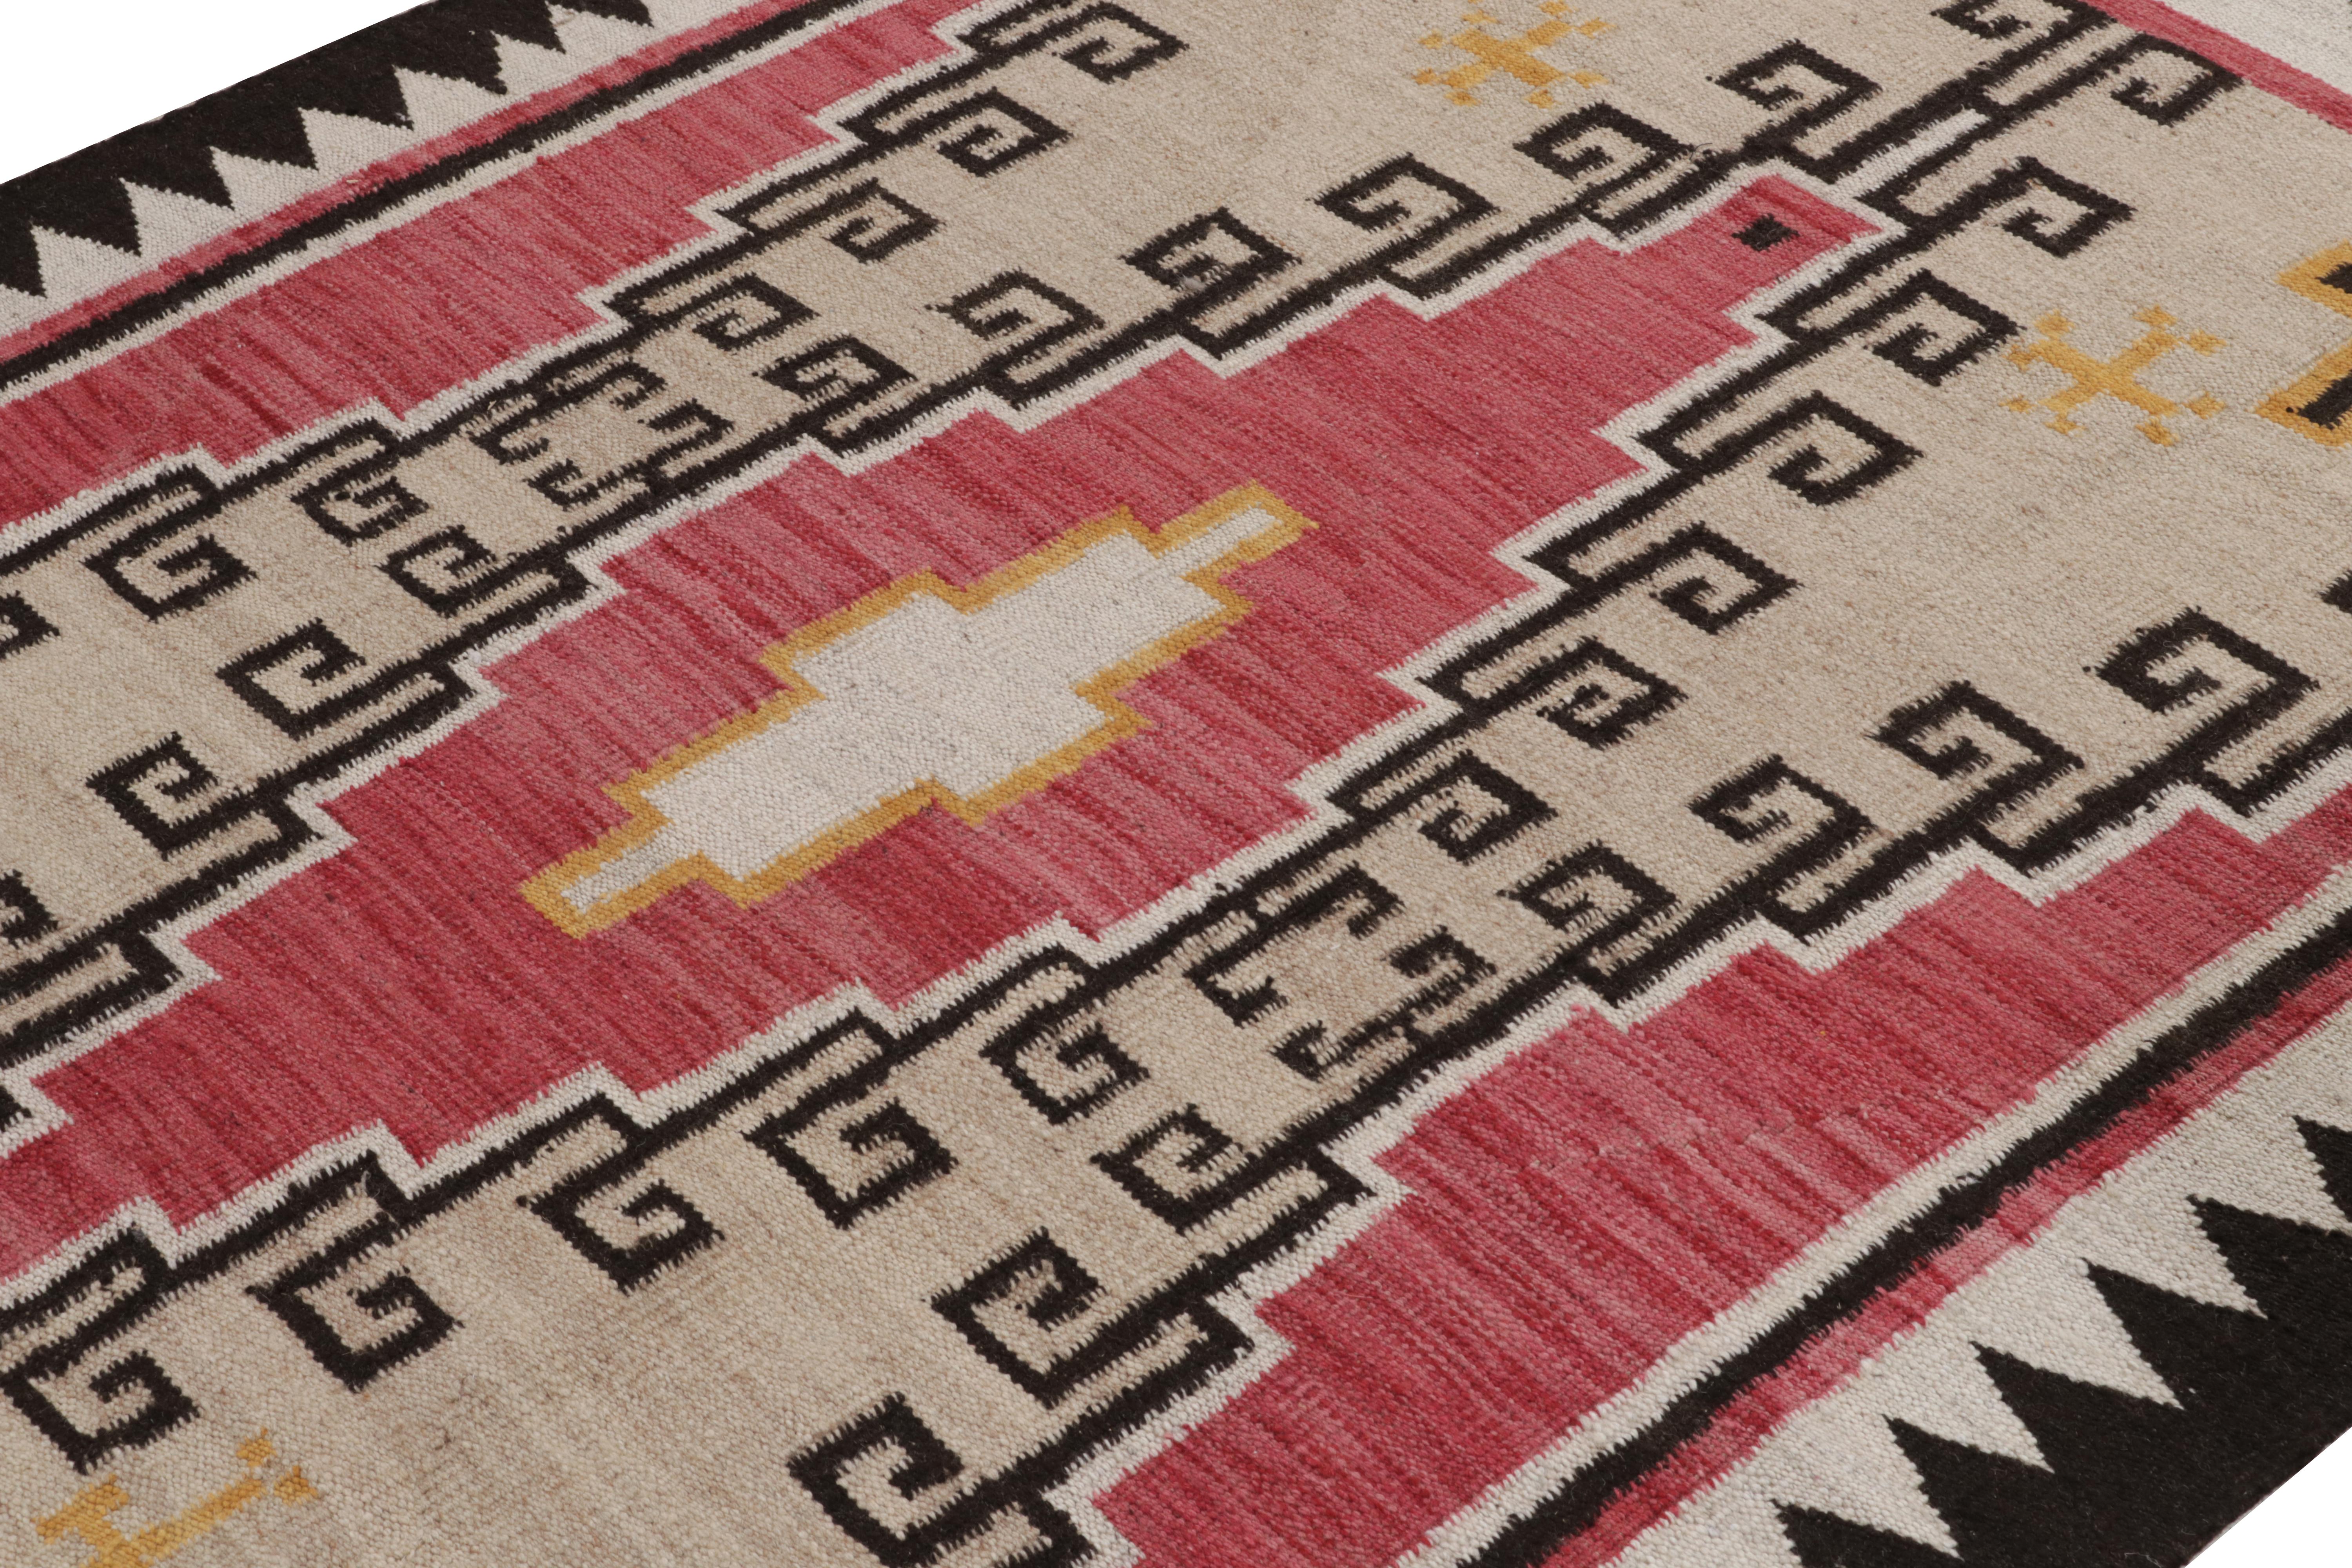 Hand-Knotted Modern Navajo Tribal Kilim Rug in Red, Beige-Brown, Off-White Geometric Pattern For Sale